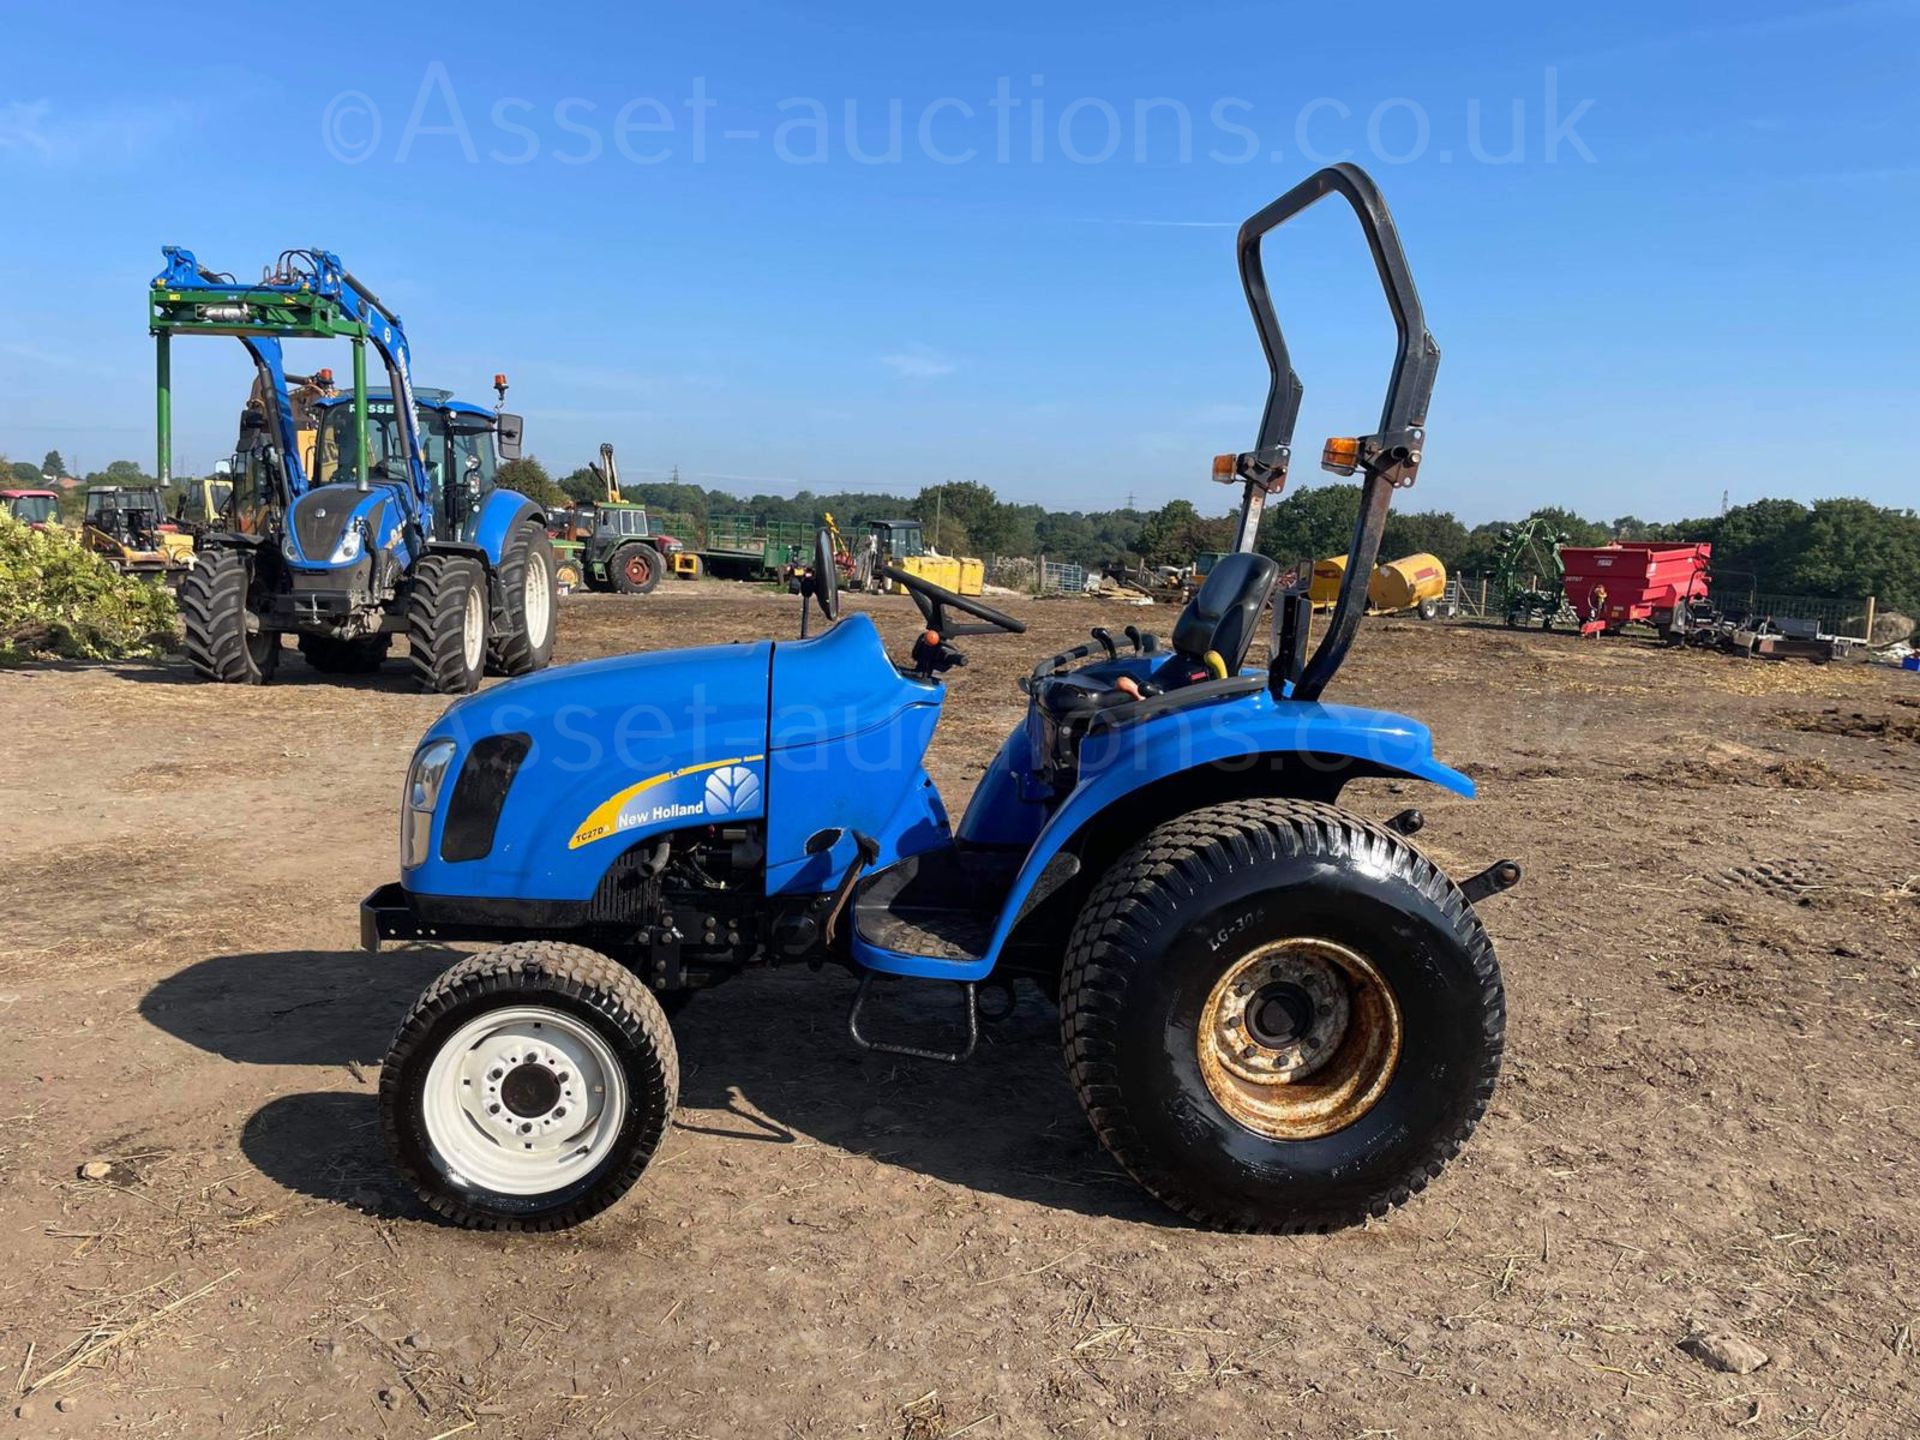 2005 NEW HOLLAND TC27DA 27hp 4WD COMPACT TRACTOR, RUNS DRIVES AND WORKS WELL, ROAD REGISTERED - Image 8 of 26